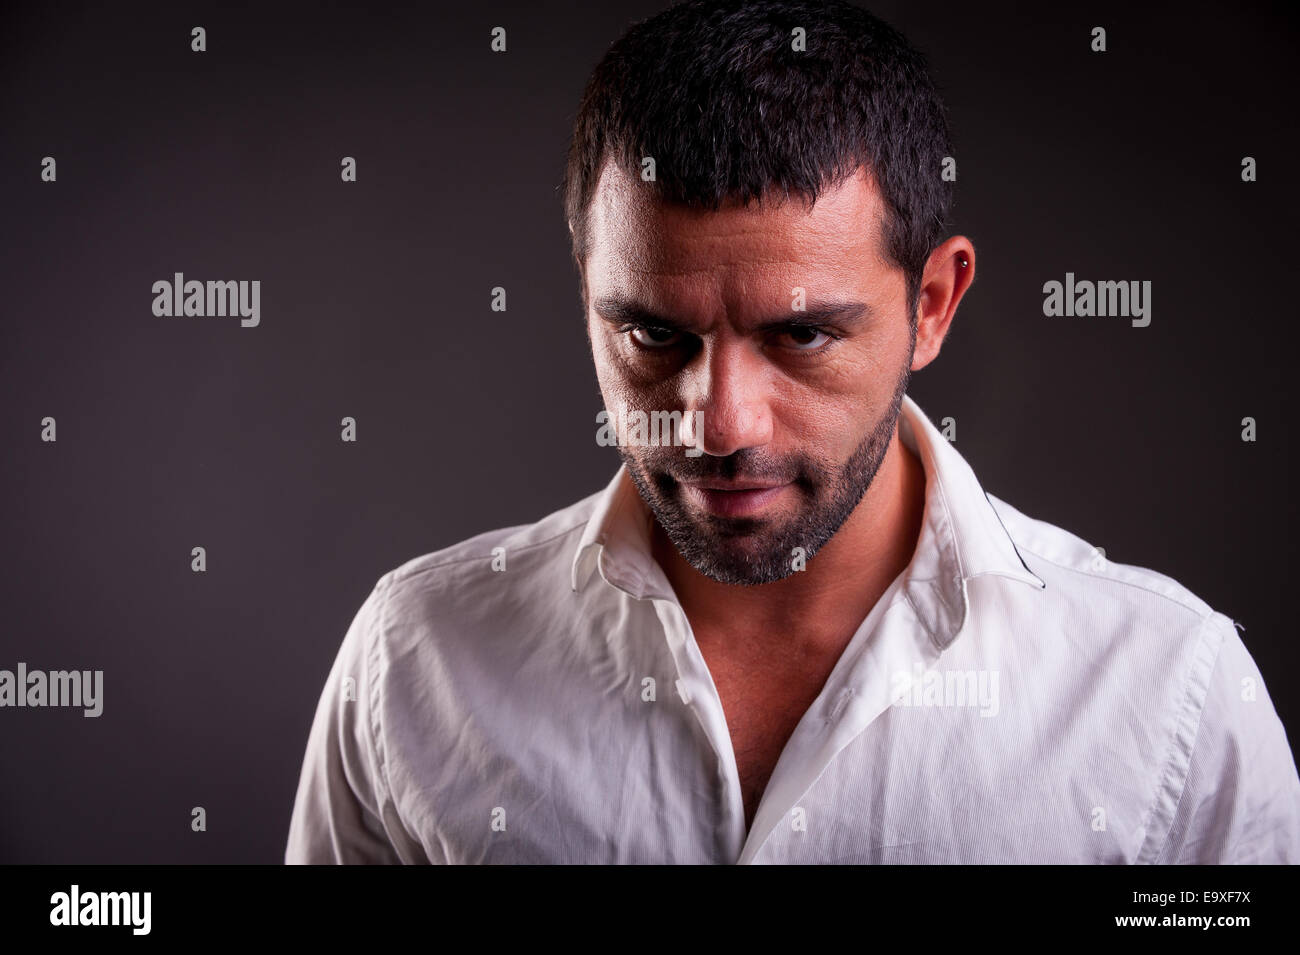 man with evil look Stock Photo